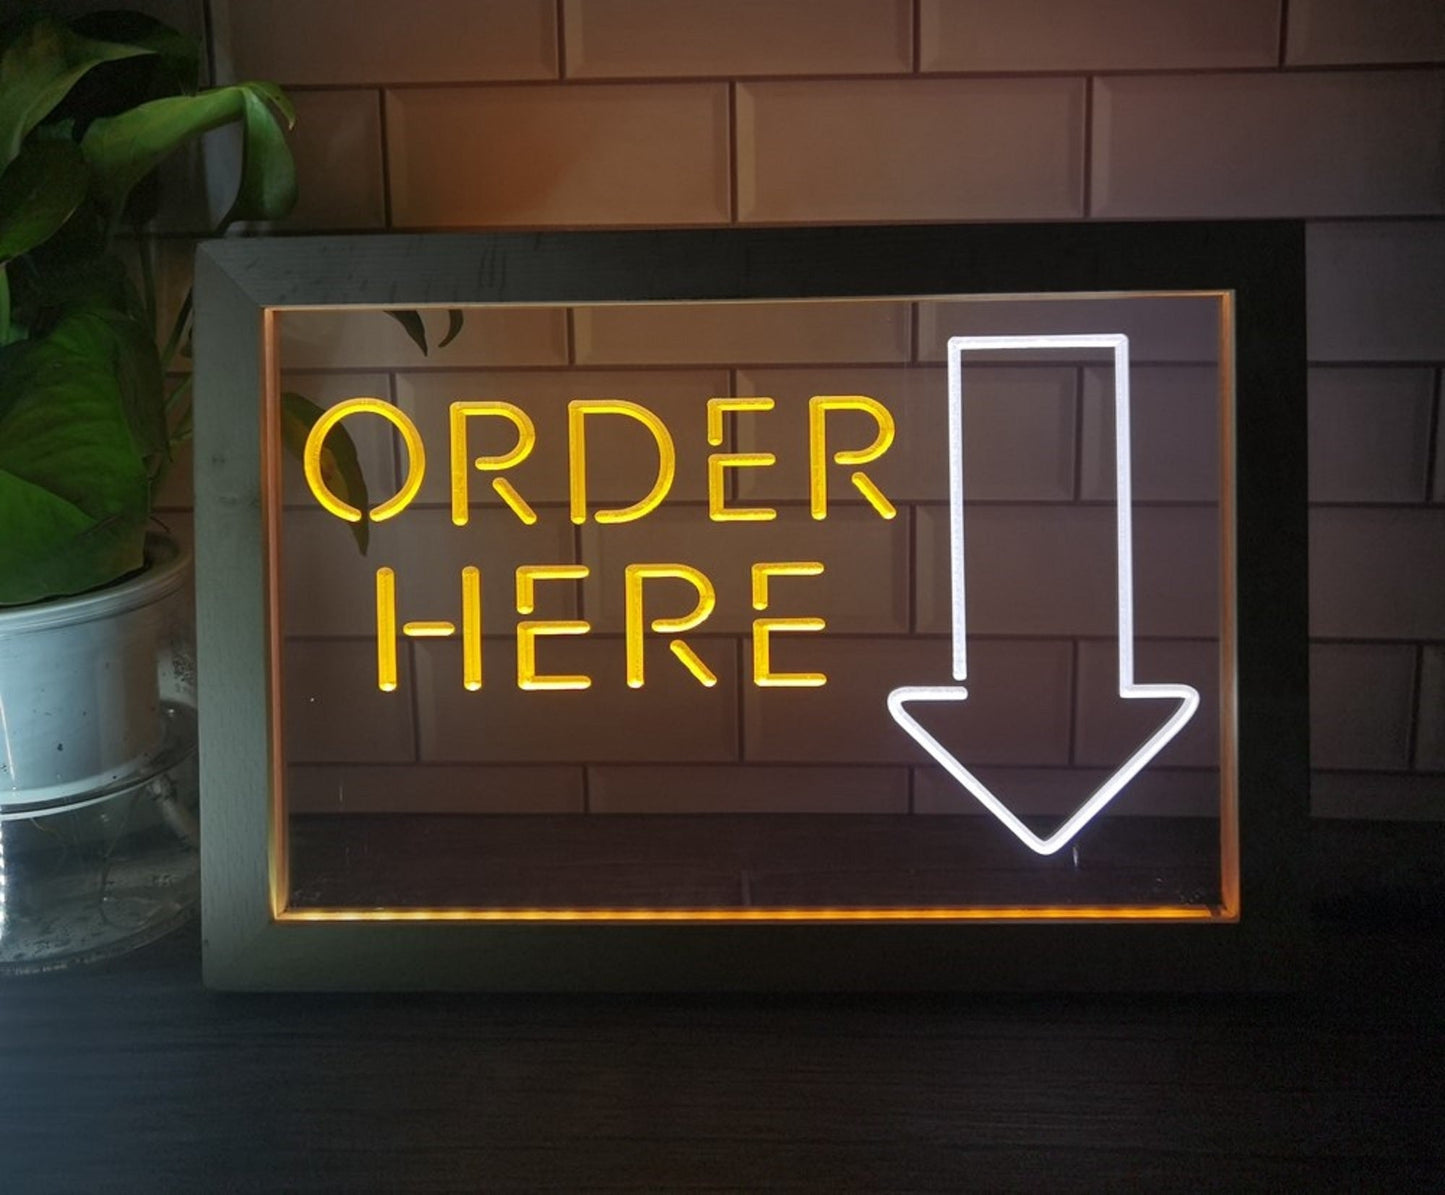 Neon Sign Framed Dual Color Order Here Store Shop Wall Desktop Decor Free Shipping